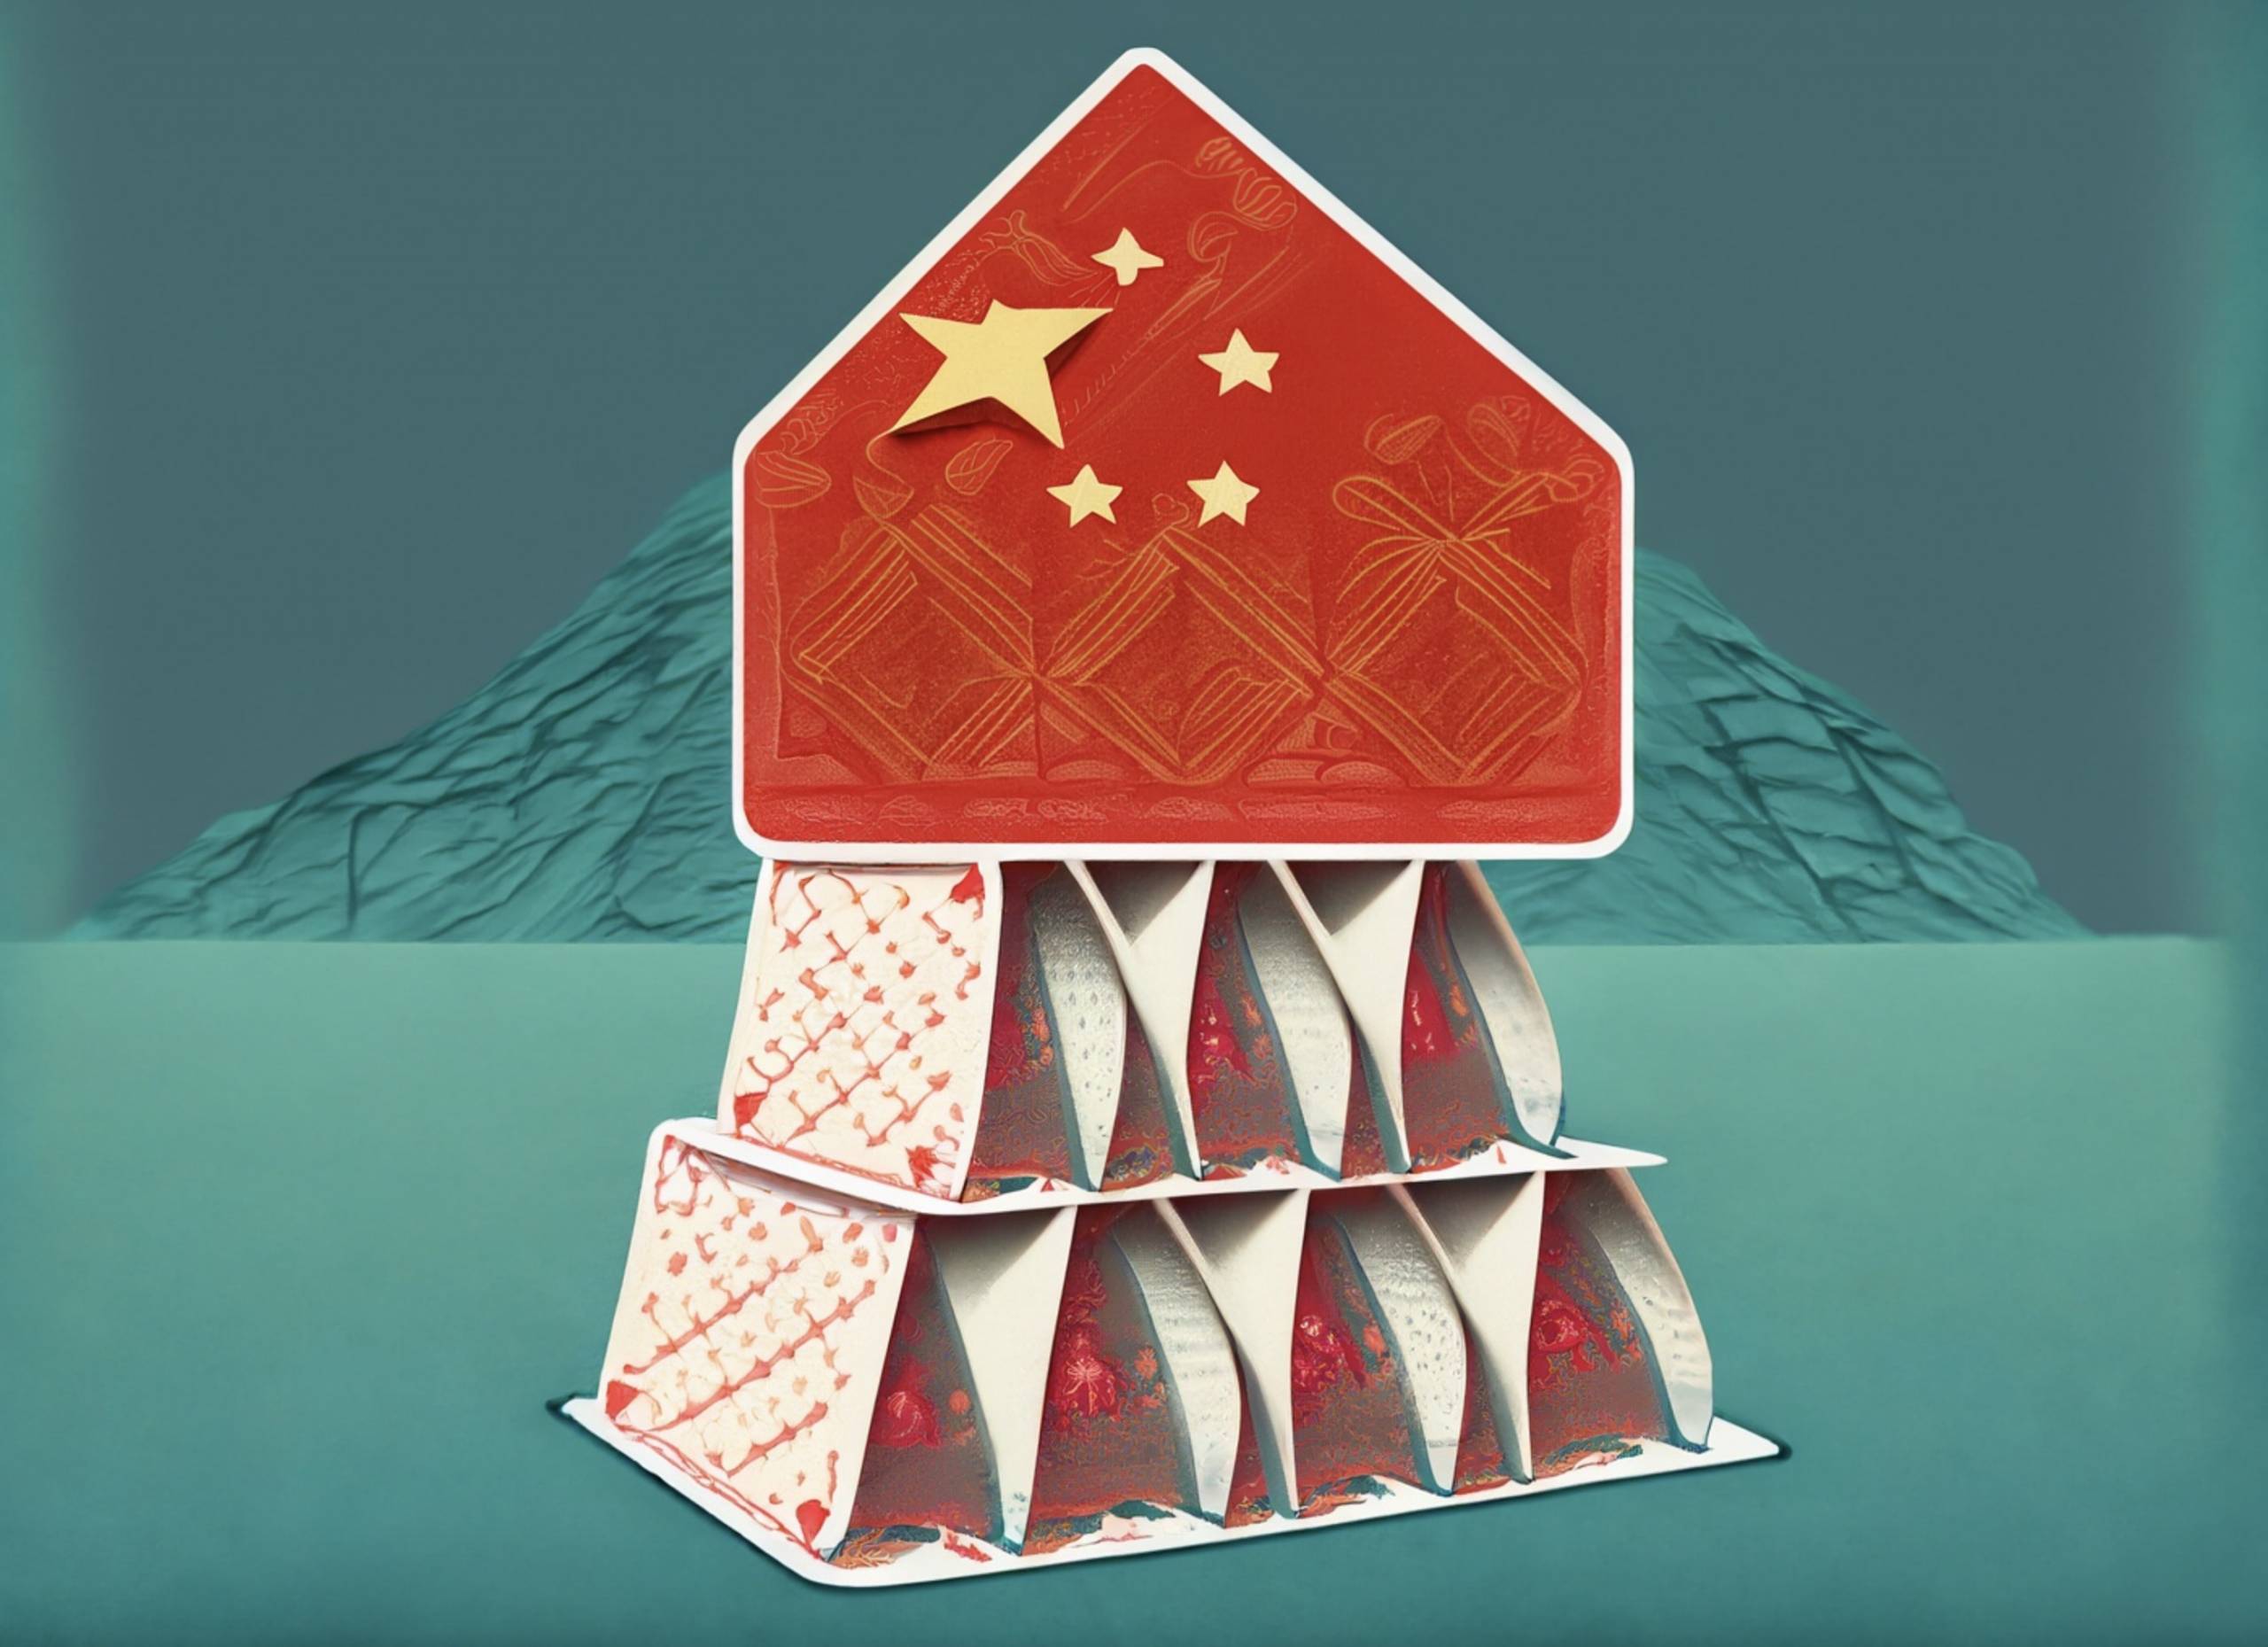 image from China: A House of Cards Waiting to Happen